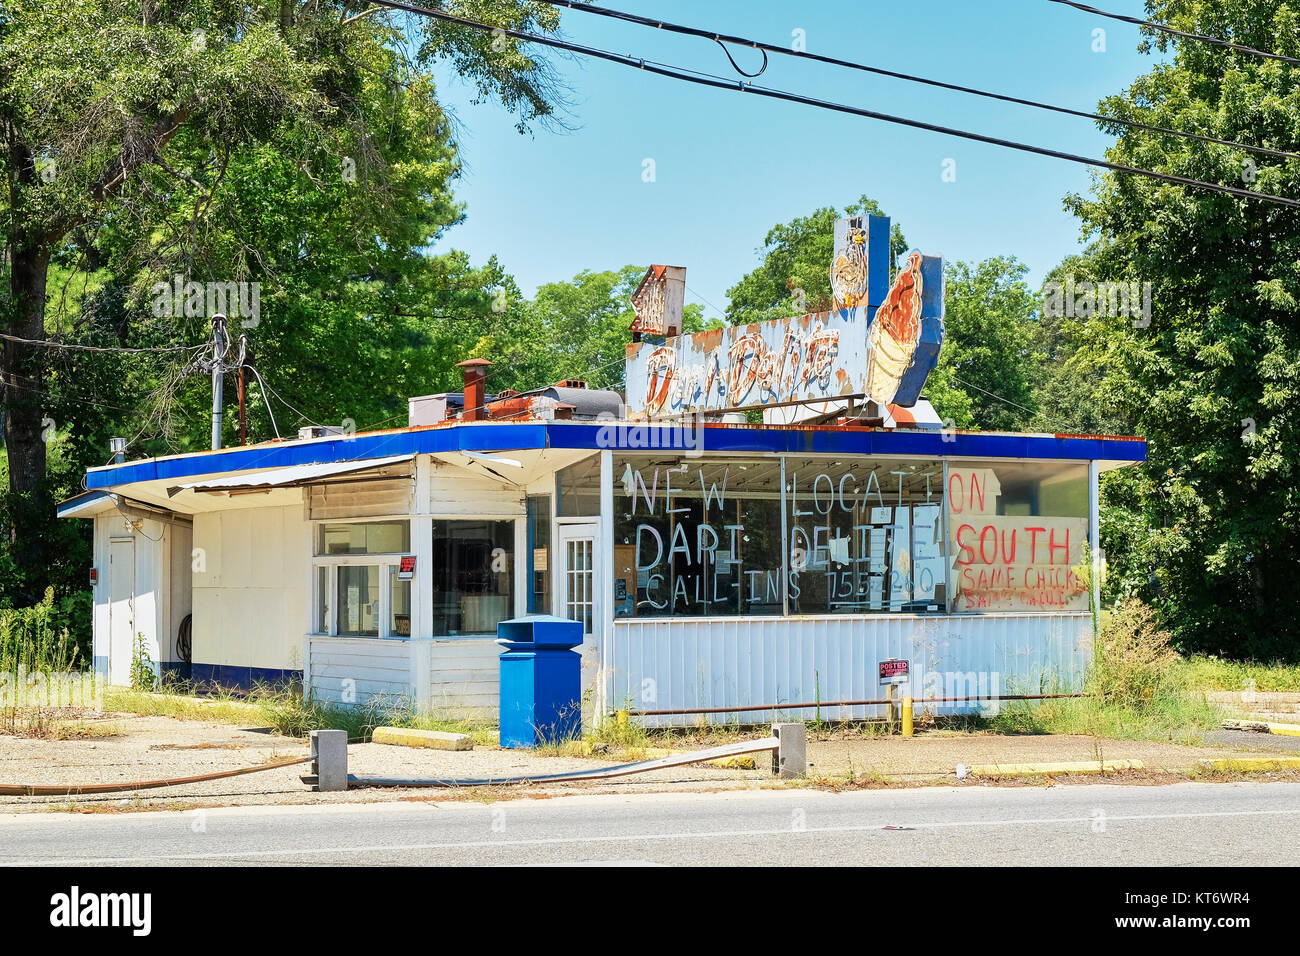 Closed and abandoned small rural business, Dari Delite, moved to new location in Clanton Alabama, USA. Stock Photo